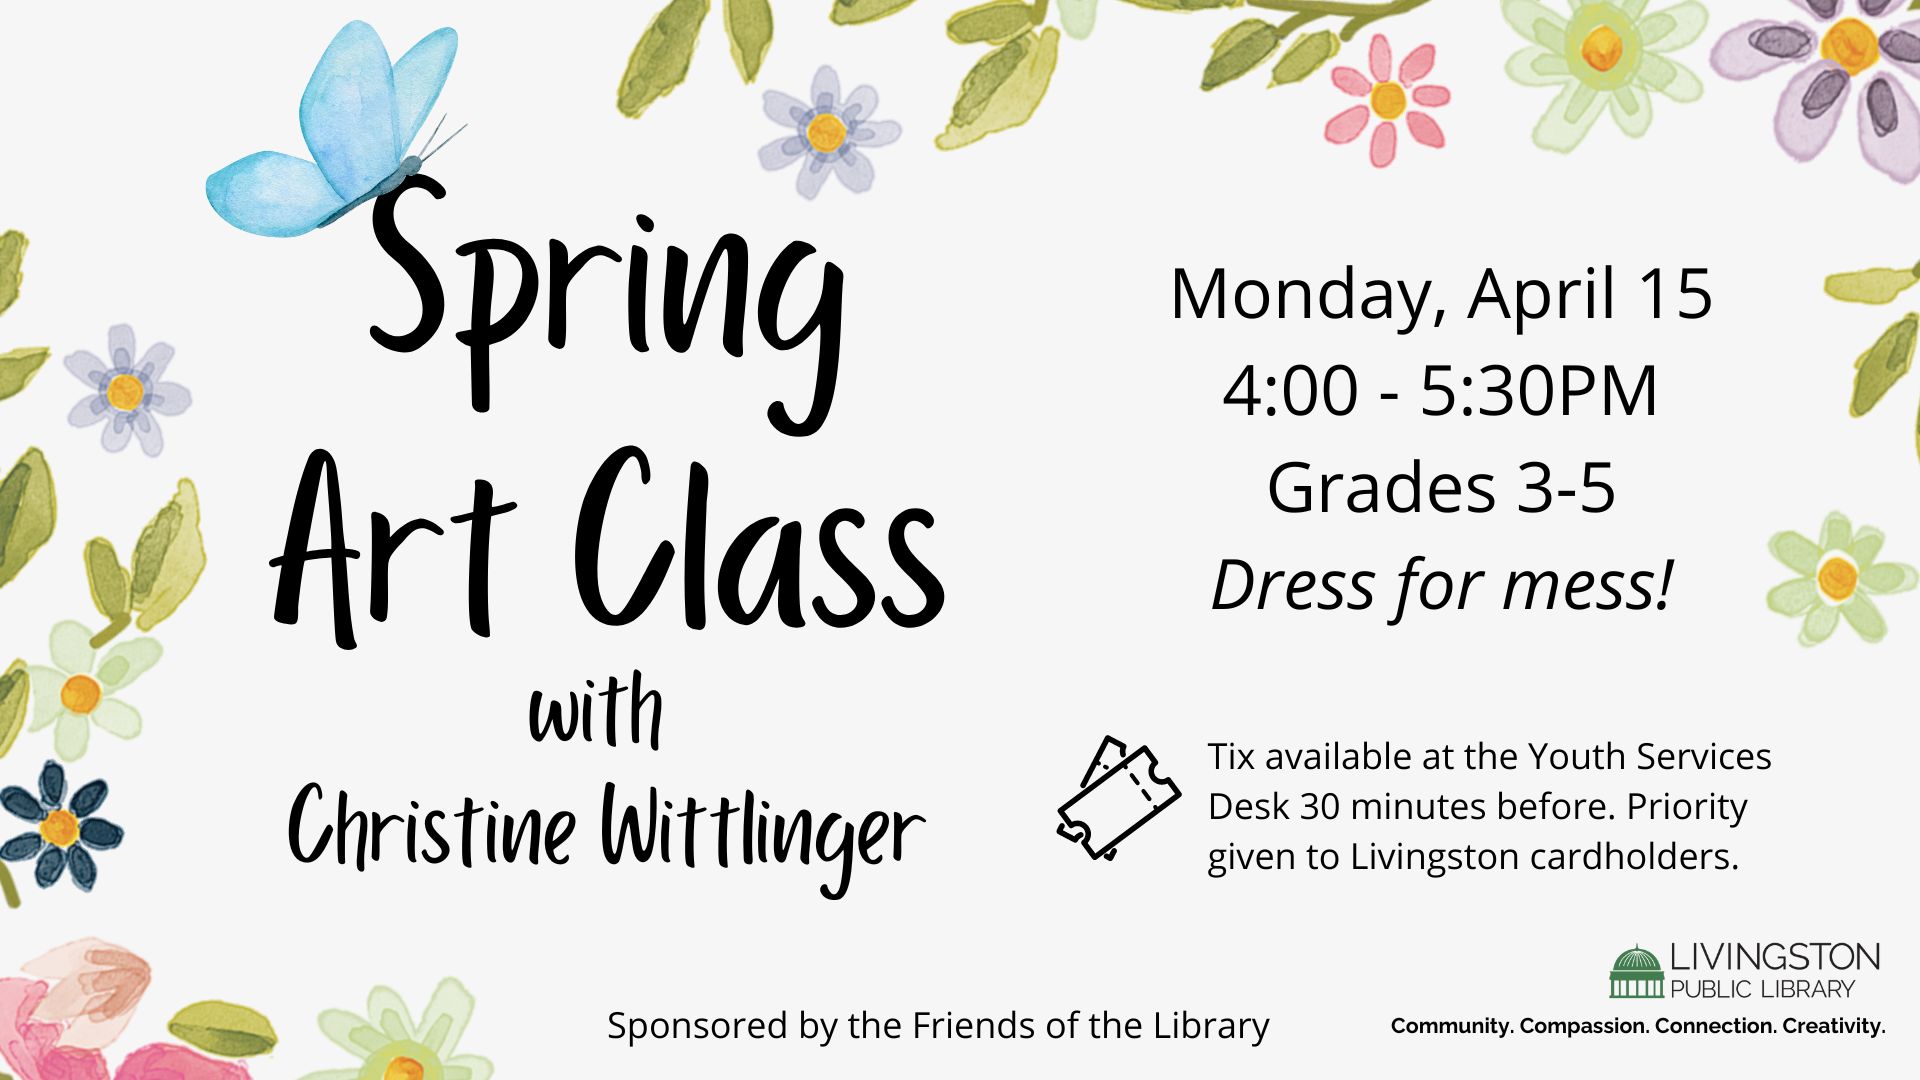 Spring Art Class with Christine Wittlinger. Monday, April 15, 4:00 - 5:30PM, Grades 3-5. Dress for mess! Tix available at the Youth Services Desk 30 minutes before. Priority given to Livingston cardholders. Livingston logo. Tagline: Community. Compassion. Connection. Creativity. Sponsored by the Friends of the Library.